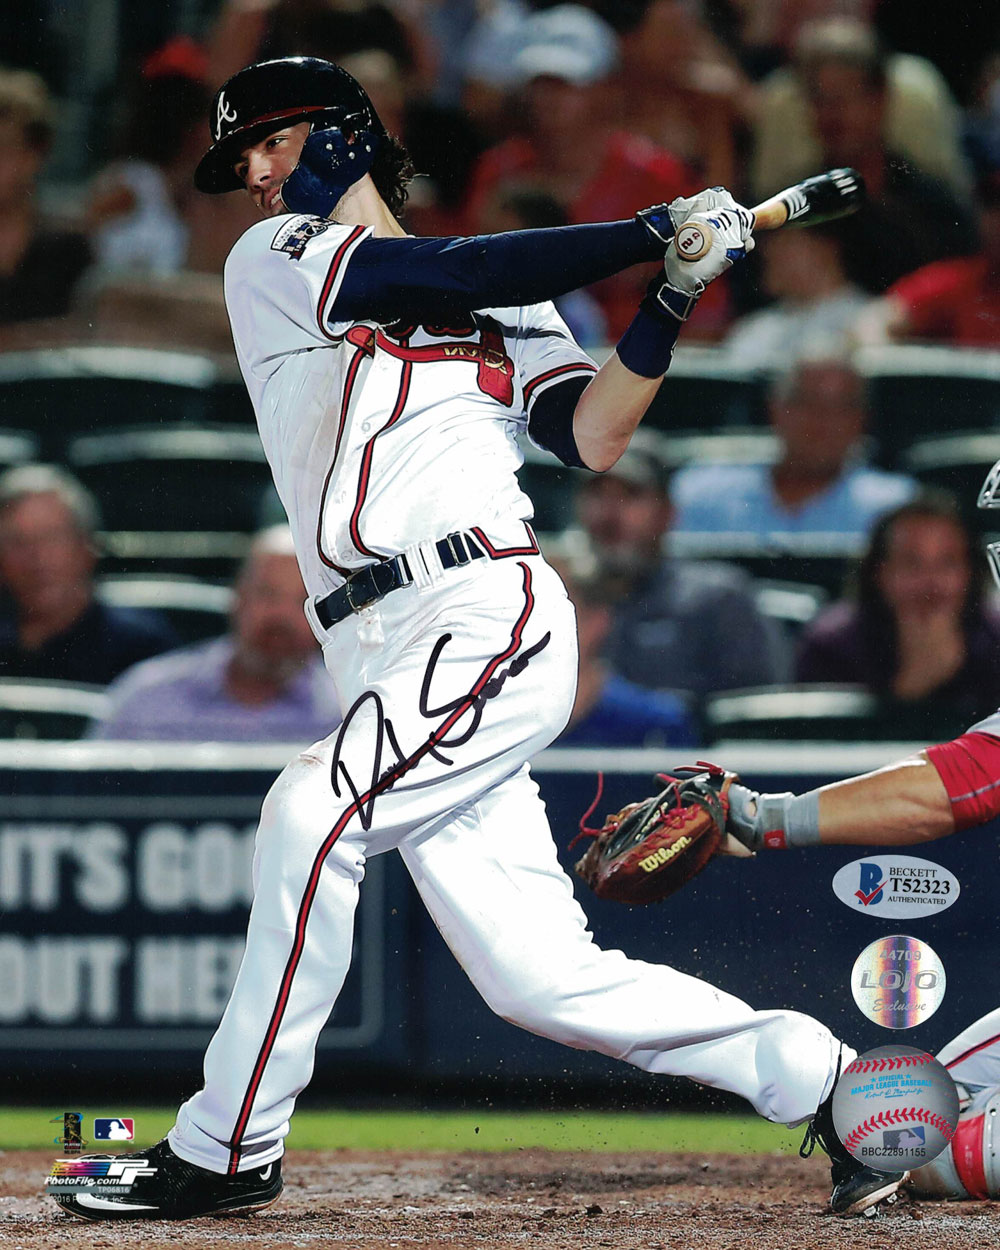 Dansby Swanson Autographed/Signed Atlanta Braves 8x10 Photo BAS 27303 PF